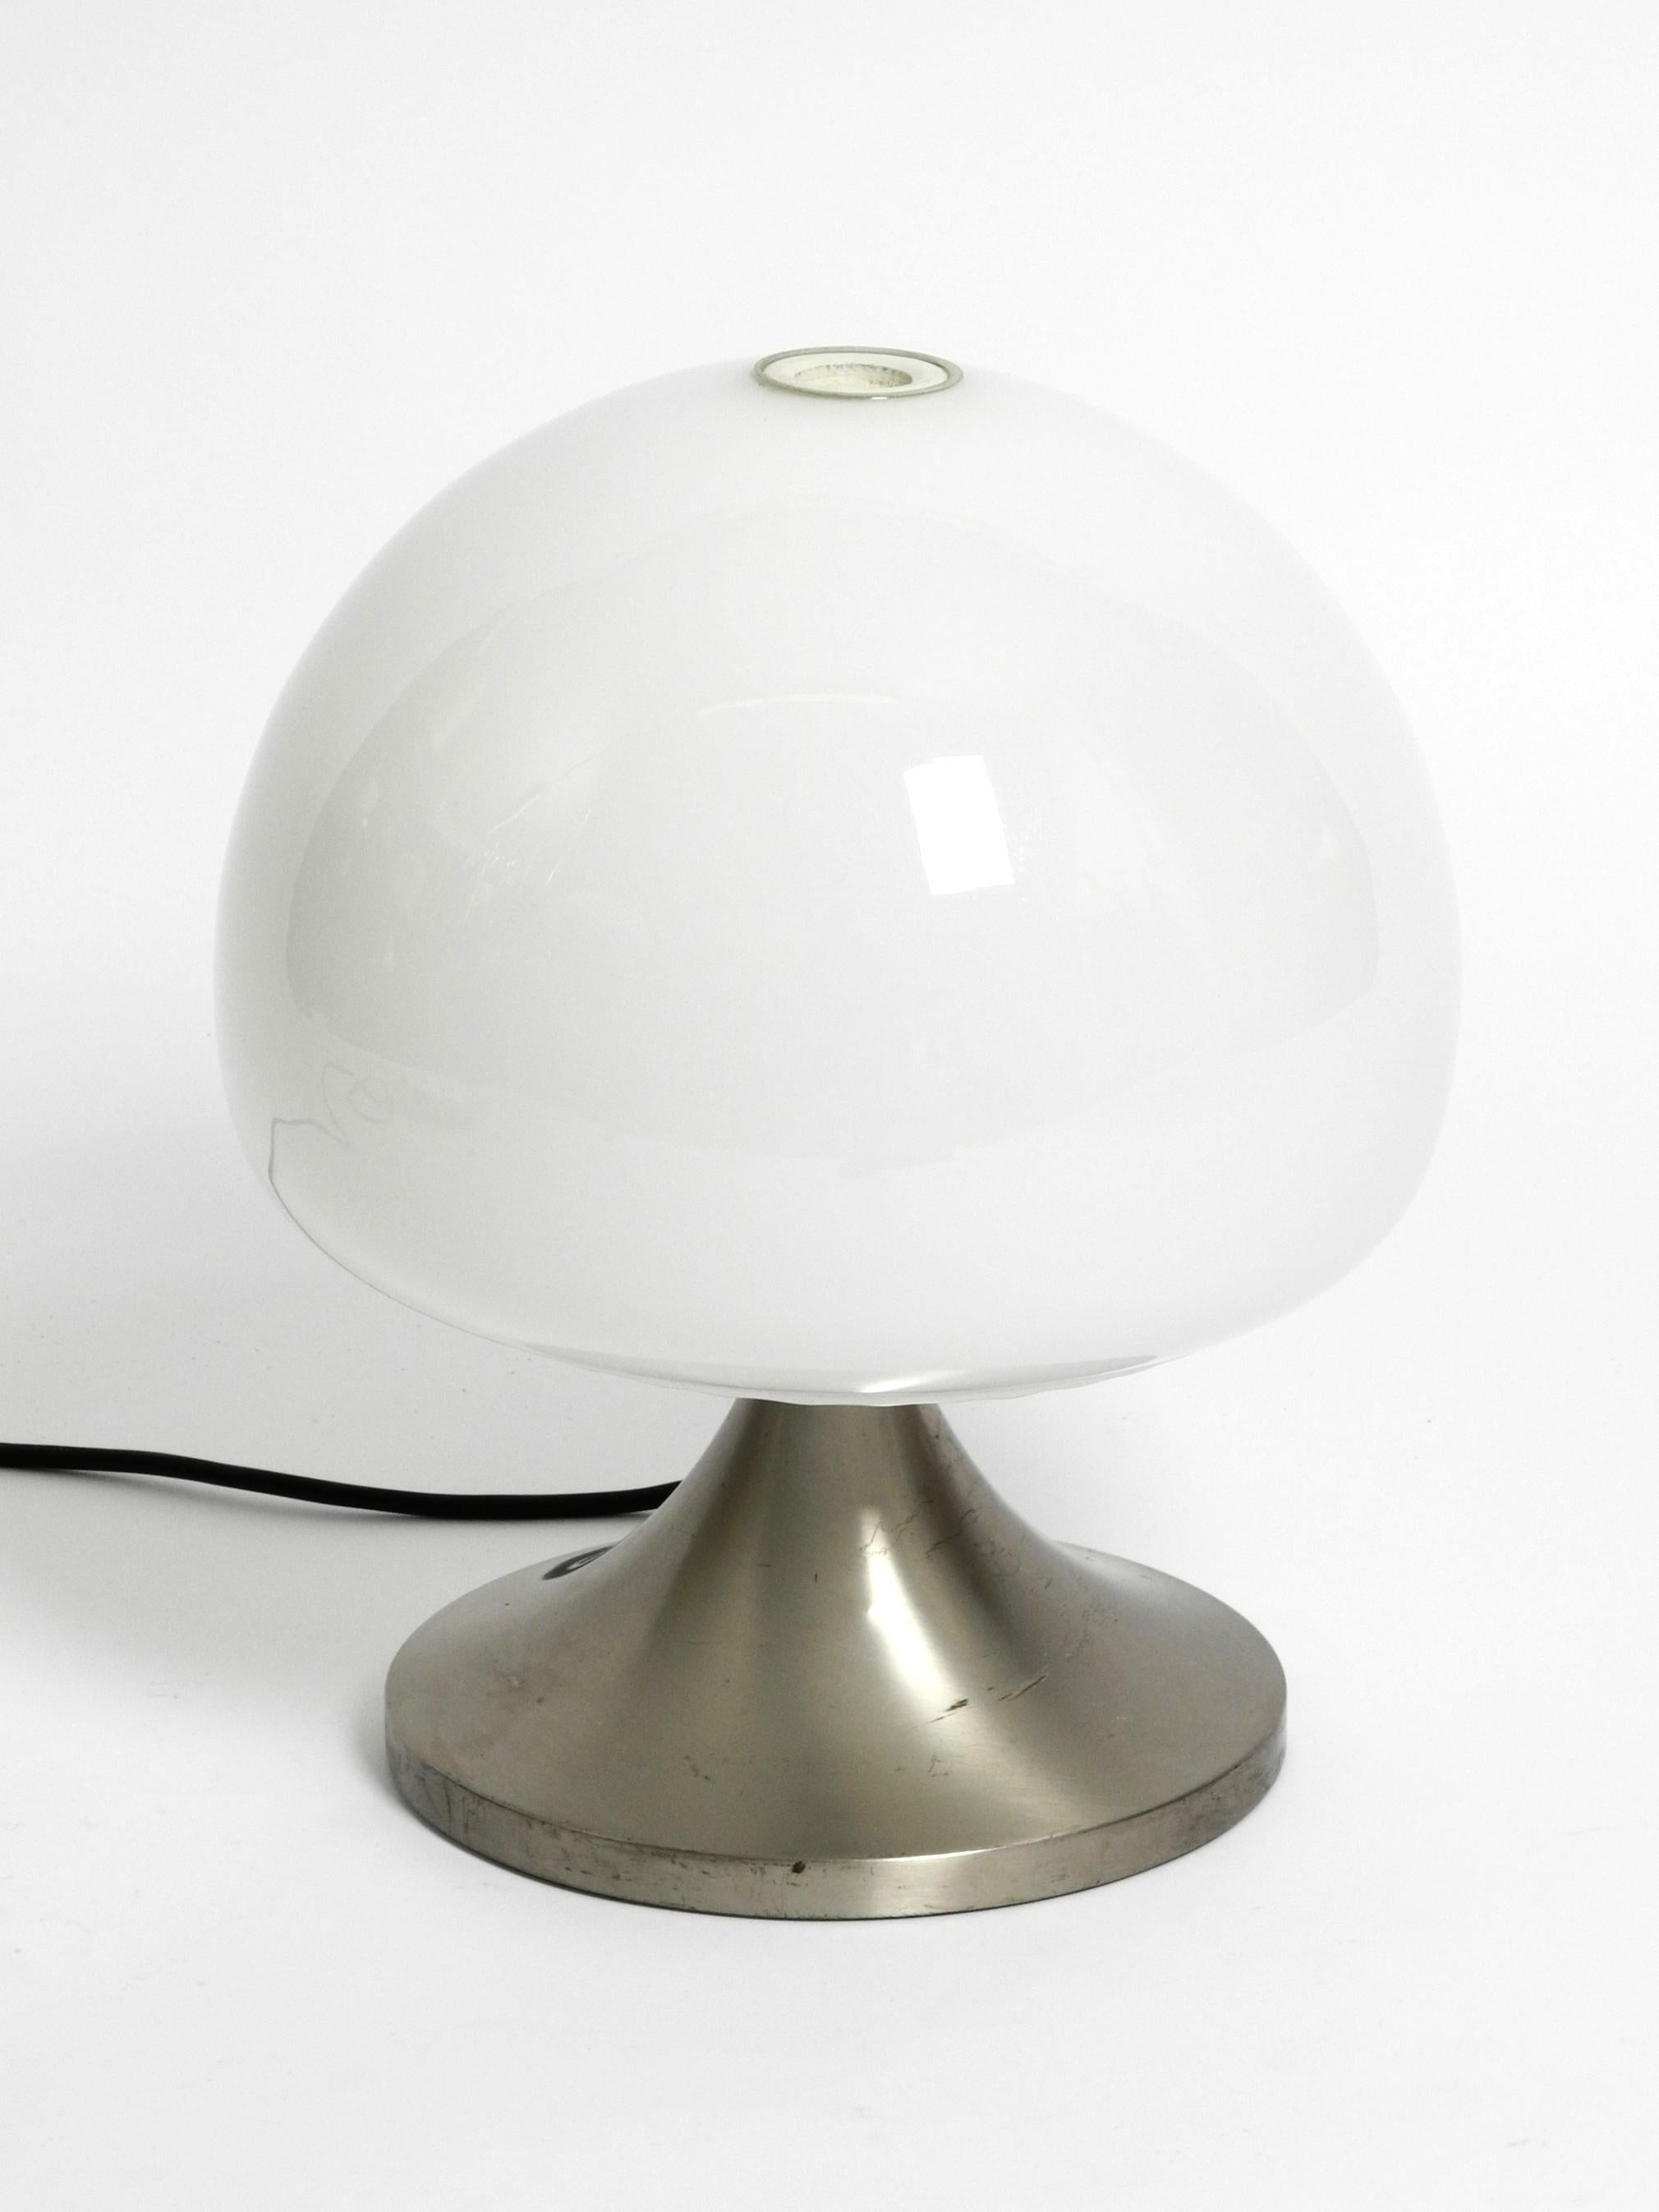 Large Italian table lamp made of solid aluminum and glass in space age design For Sale 2